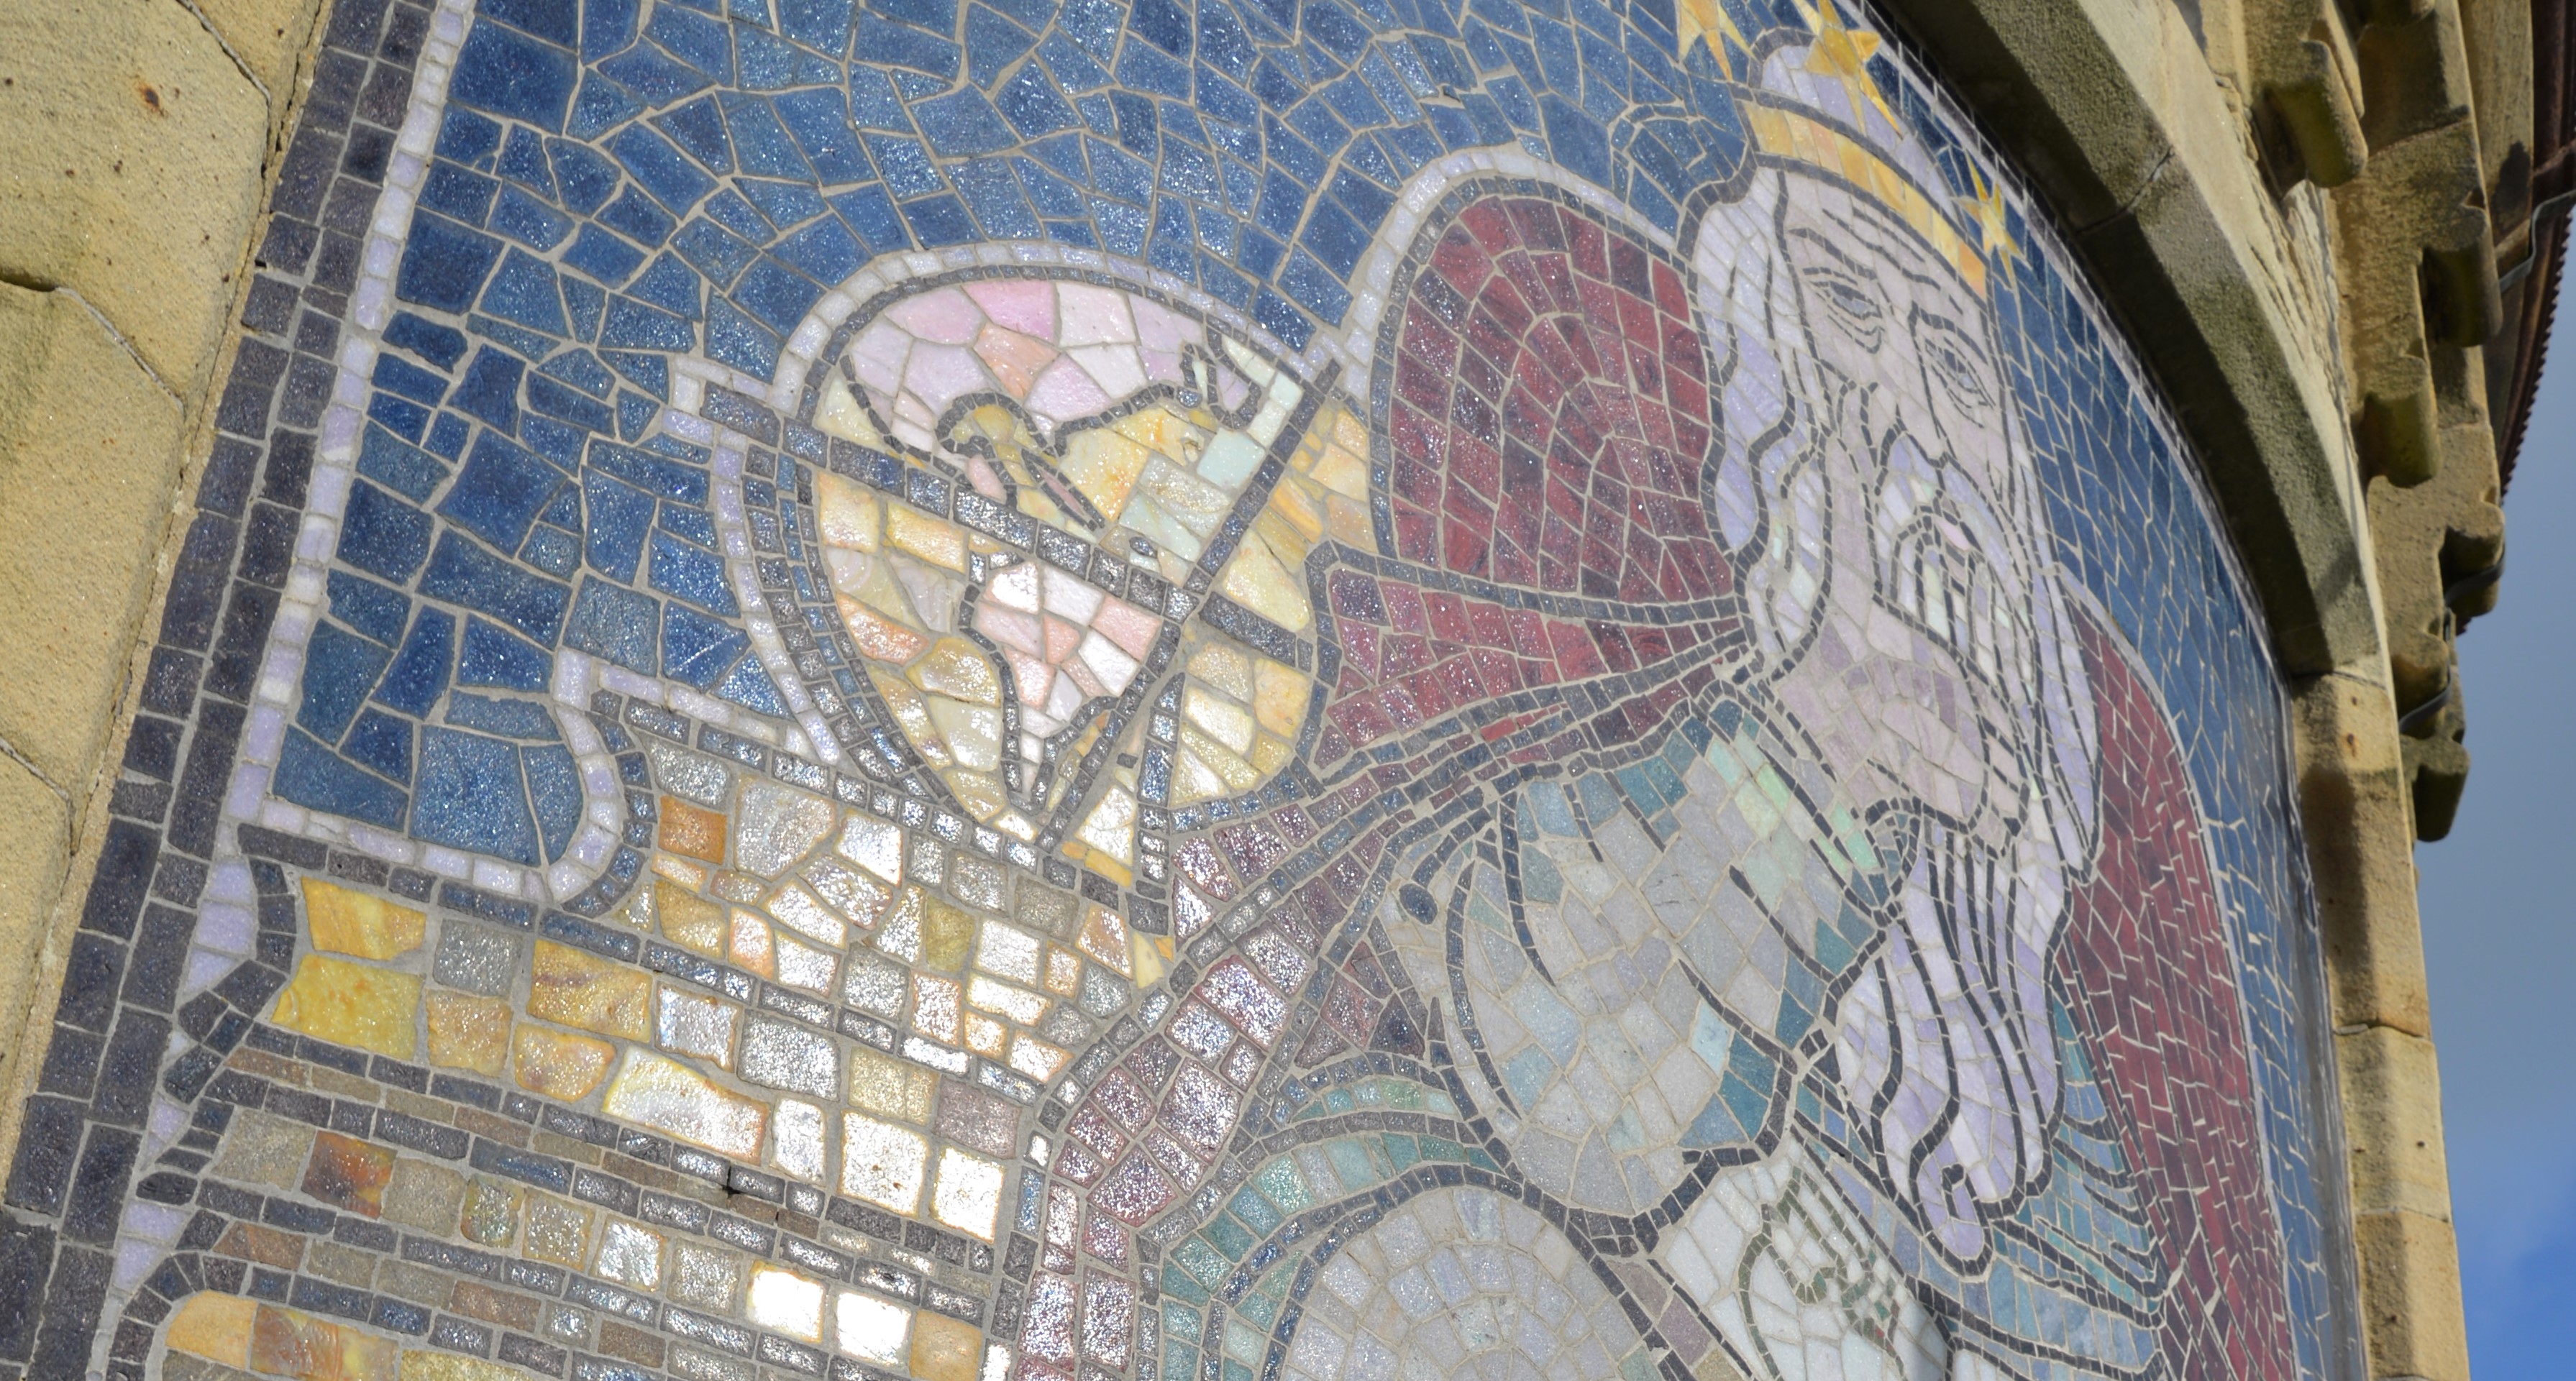 Part of the Old College mosaic by Charles F. A. Voysey is thought to represent the Greek mathematician, physicist, engineer and astronomer Archimedes. 